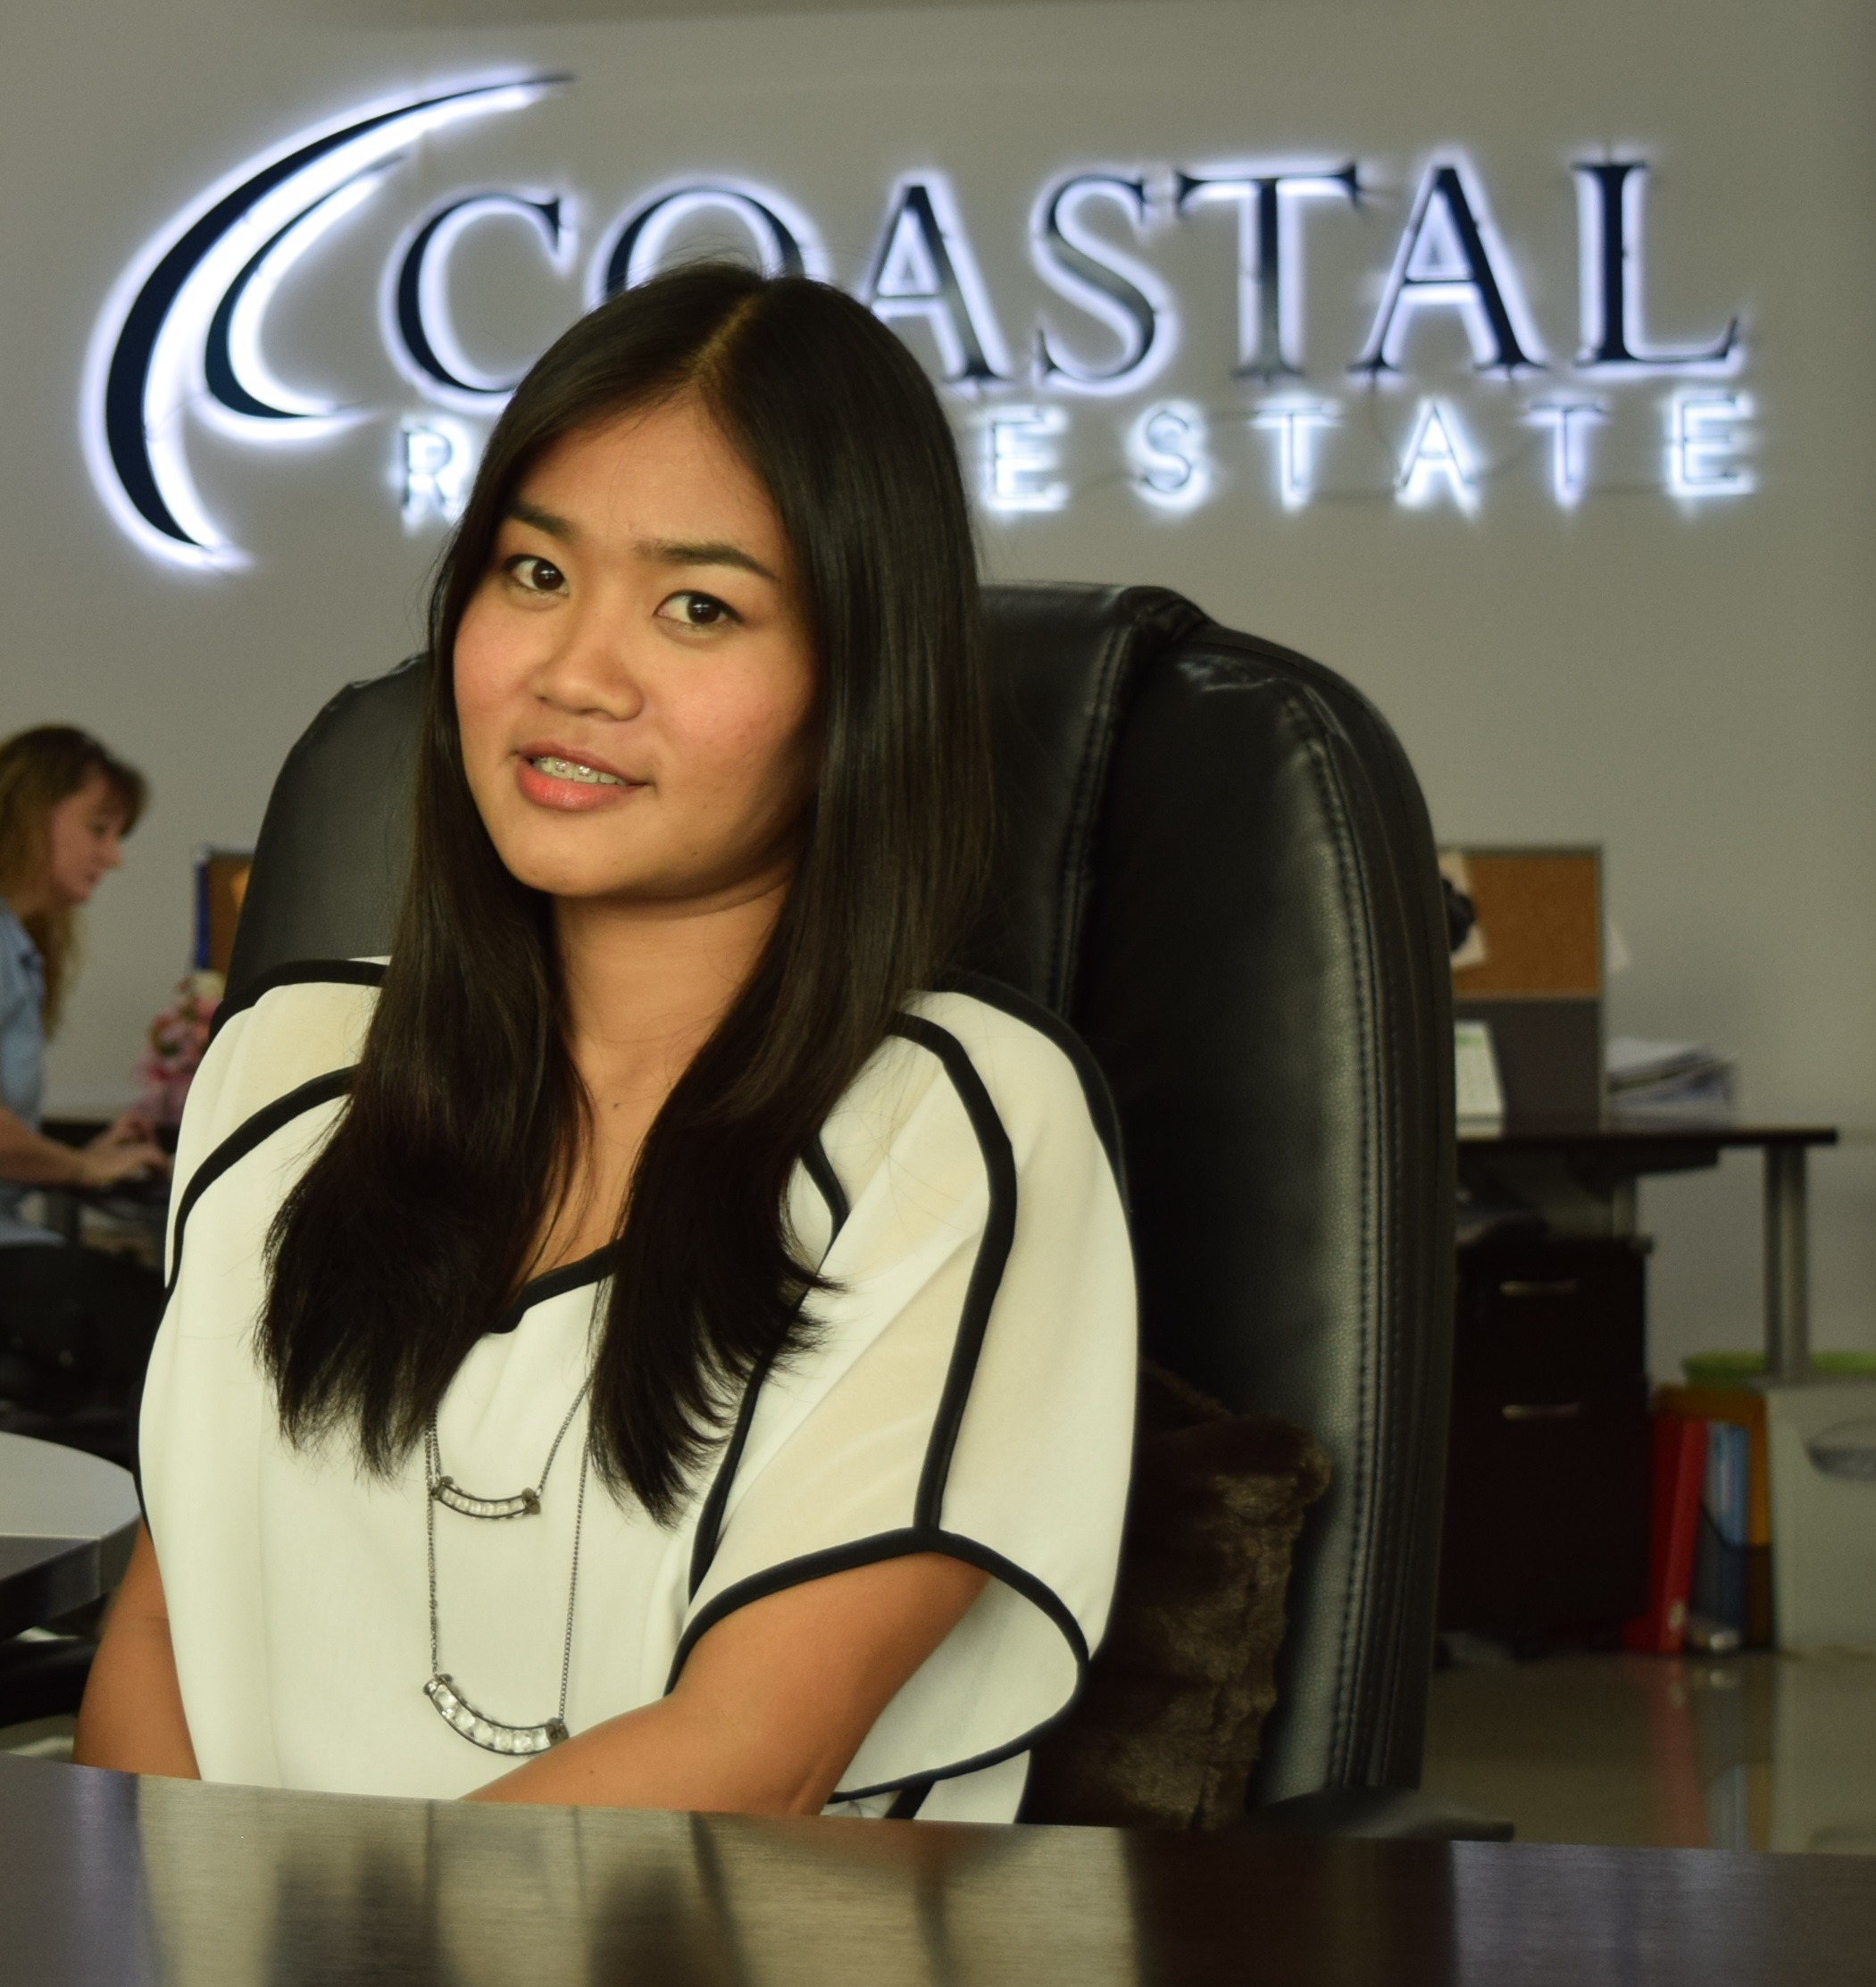 Coastal Real Estate Keeping Up With Evolution